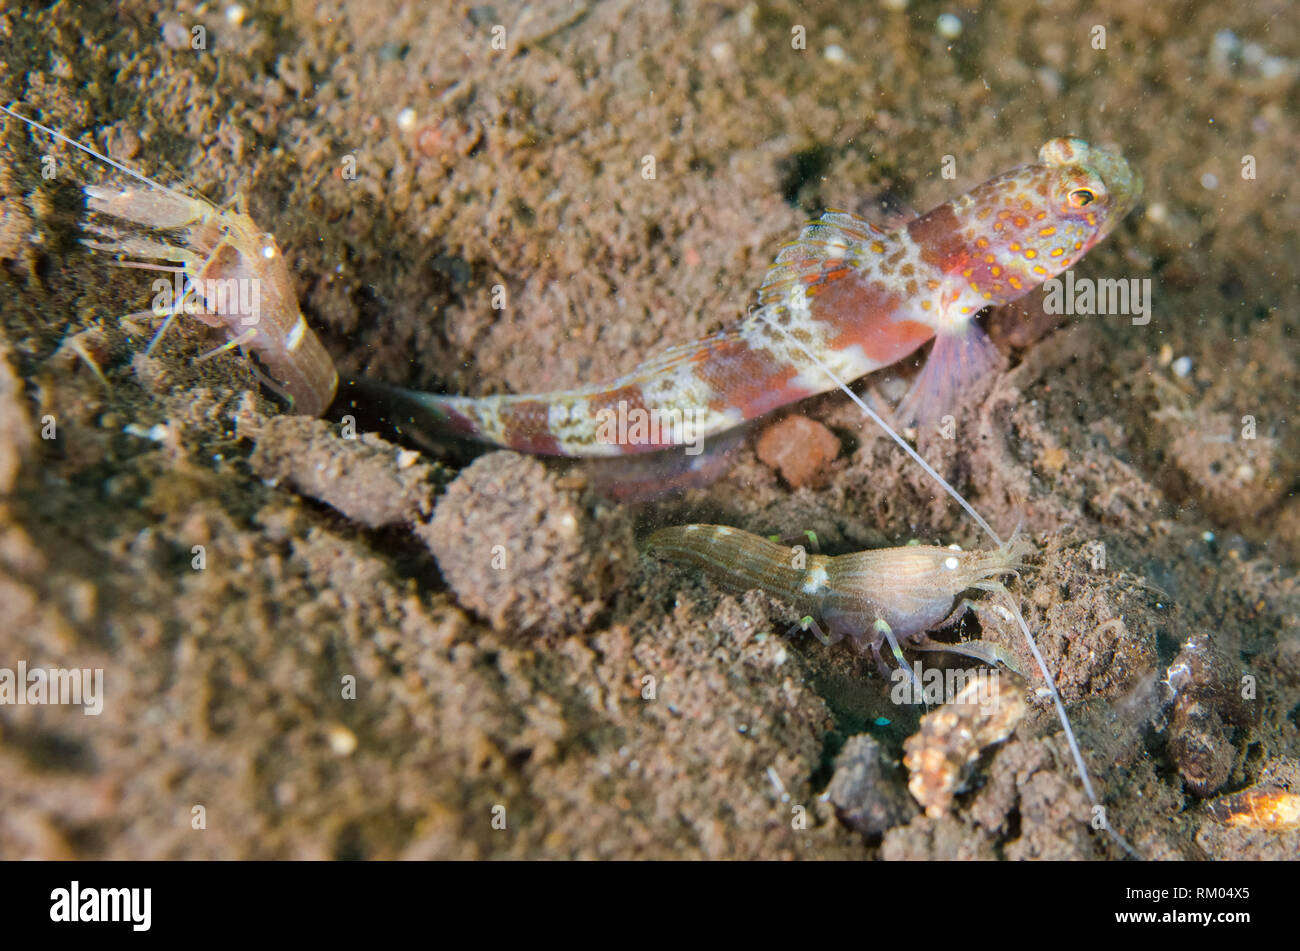 Blotchy Shrimpgoby, Amblyeleotris periophthalma, with pair of Snapping Shrimp (Alpheus sp.) at entrance of hole on black sand, Pong Pong dive site, Se Stock Photo